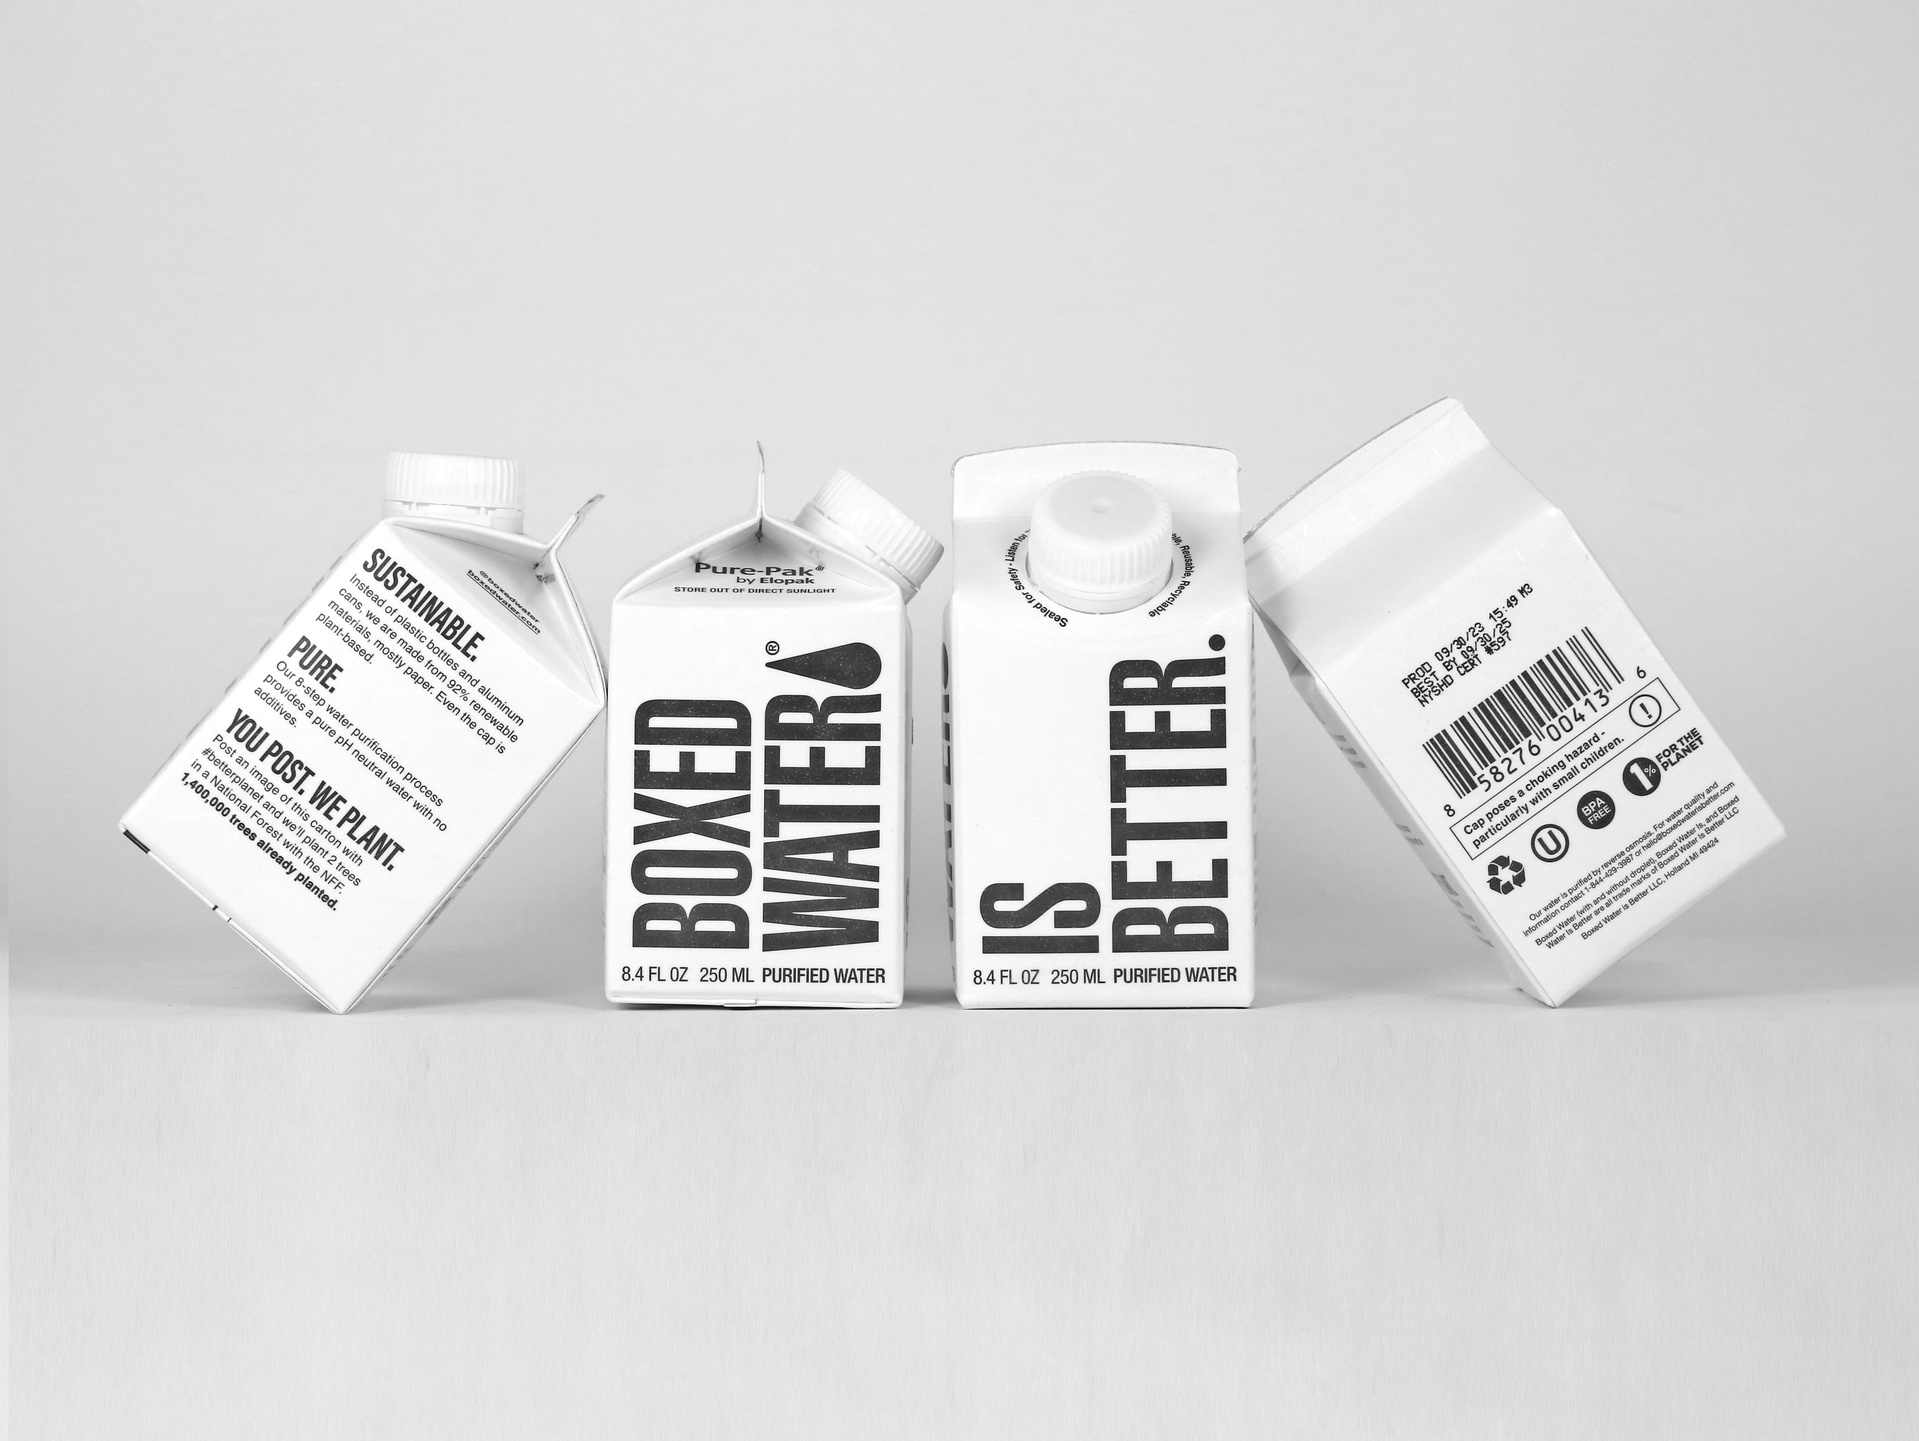 Diamond Packaging switched to Boxed Water is Better for all its visitors.